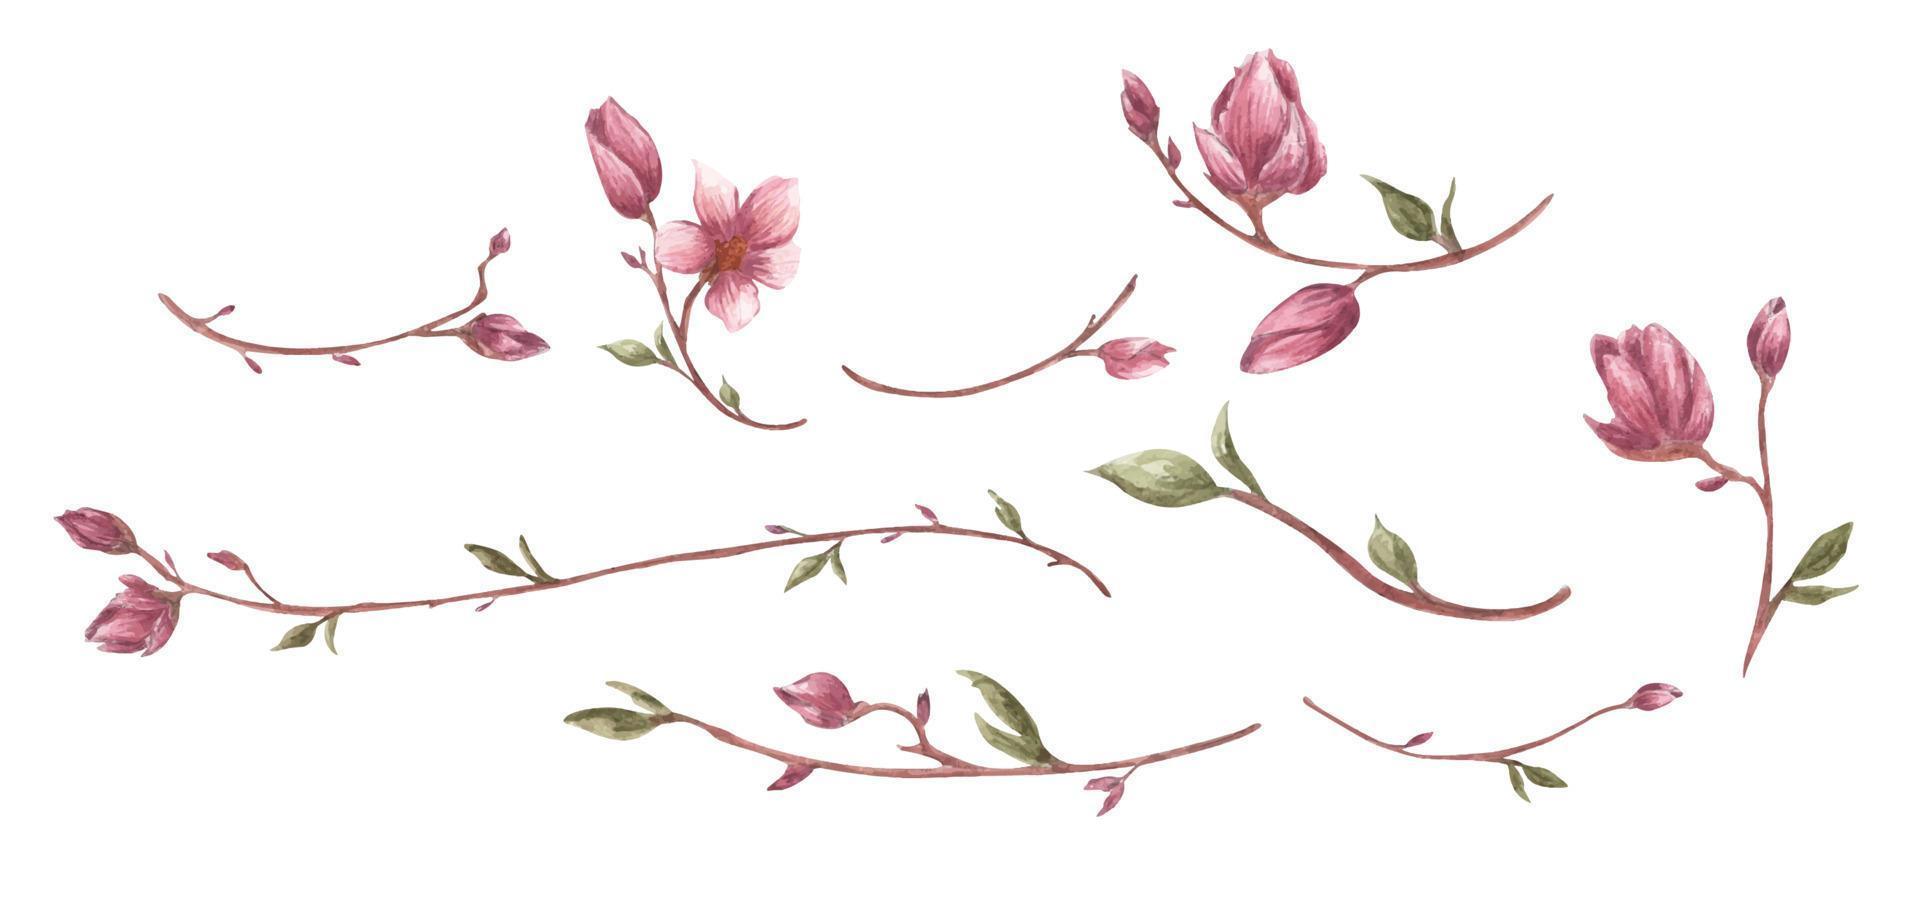 Magnolia flower and branches set. Watercolor illustration. vector